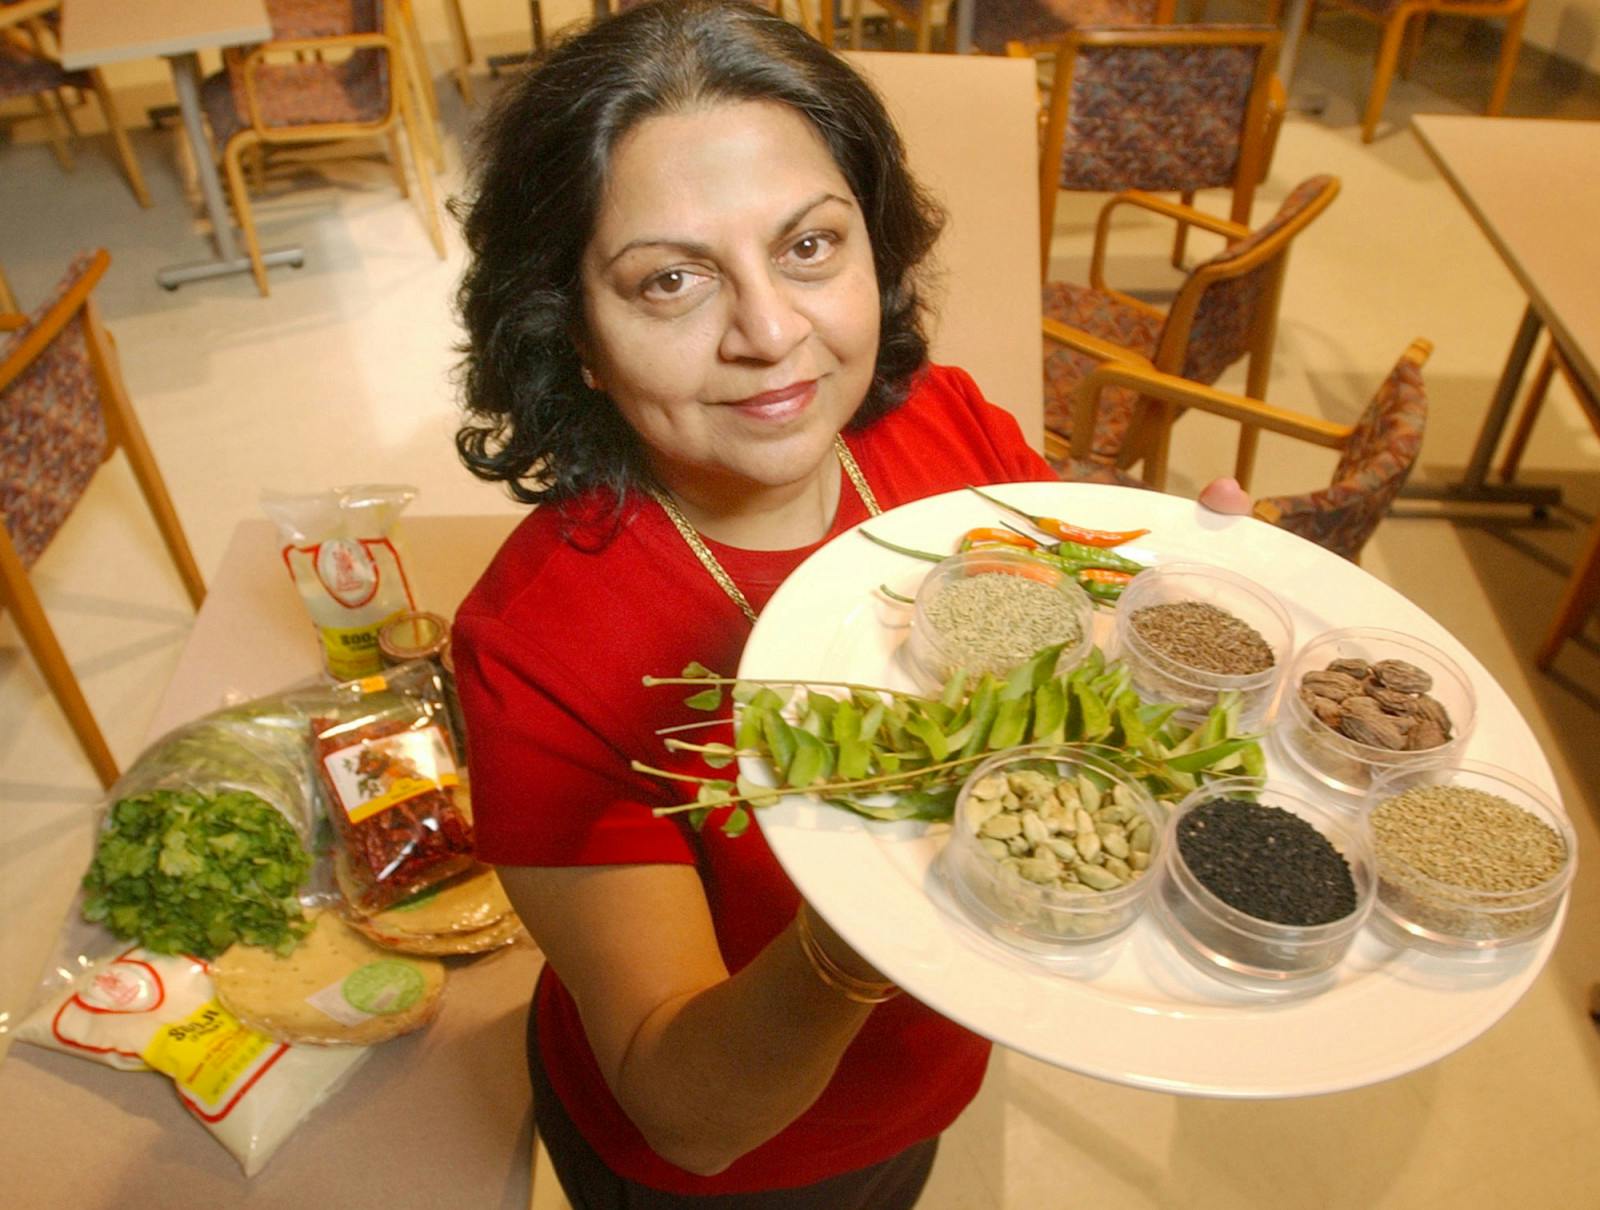 2/16/05 BOSTON, MA: Chef and author Julie Sahni at Boston University.Red whole chilis, corriander, natural tamarind concentrate. (Patrick Whittemore/MediaNews Group/Boston Herald via Getty Images)